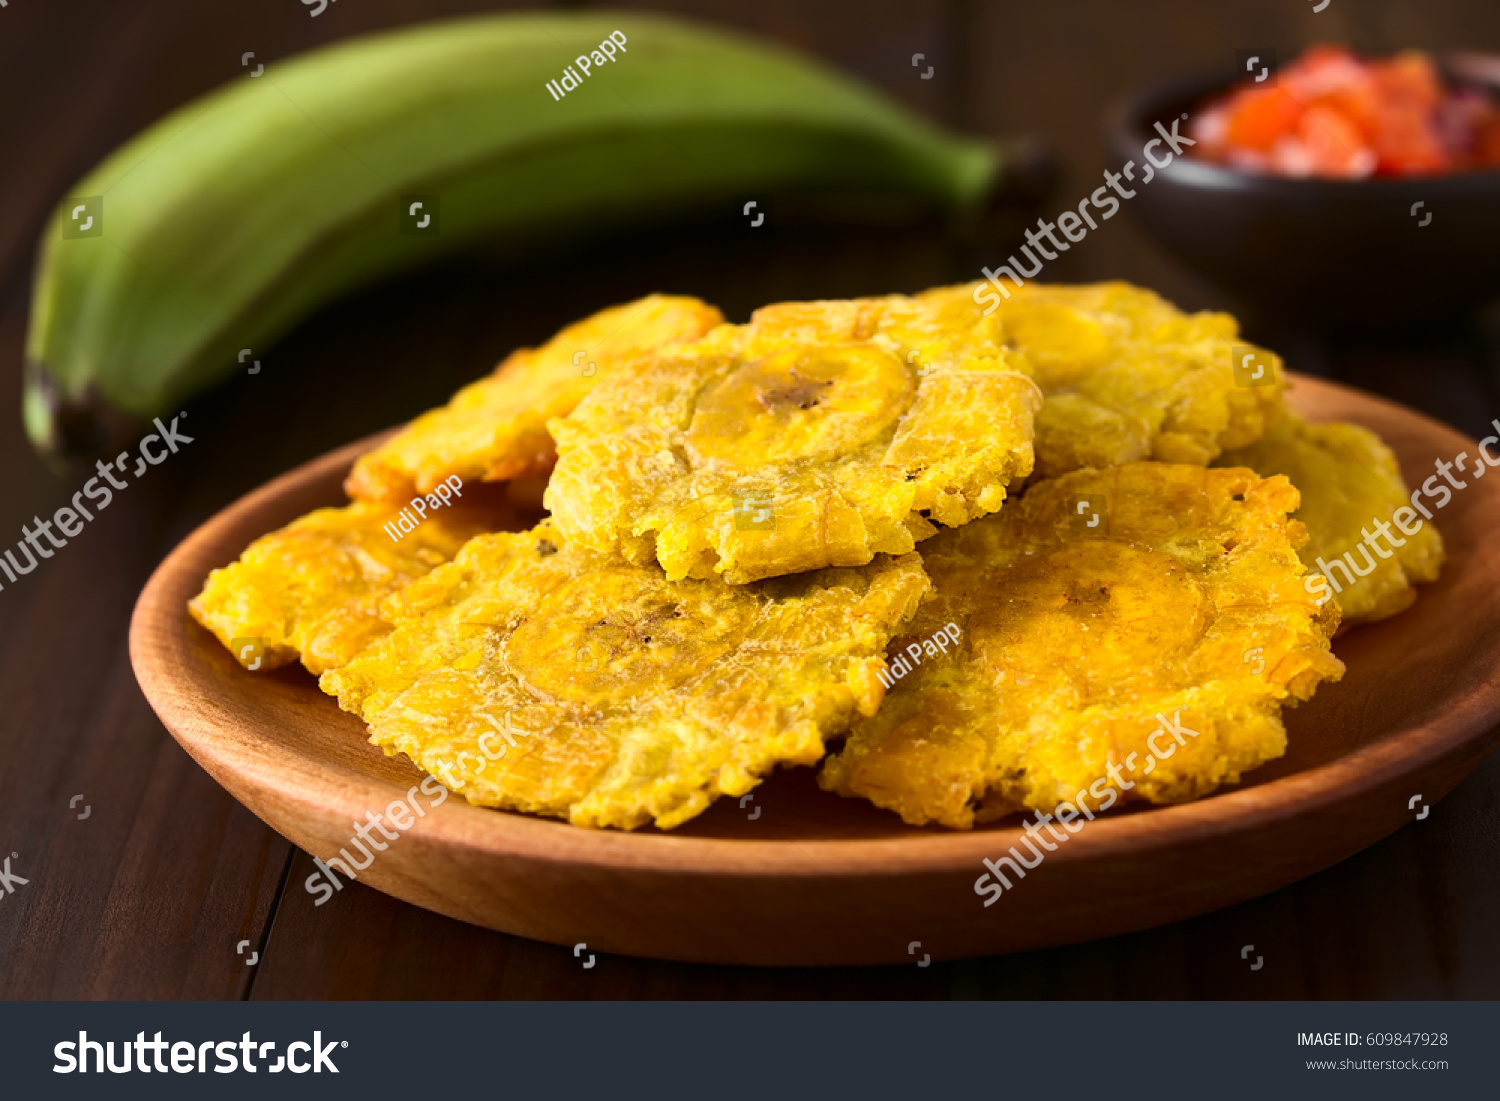 Patacon or toston, fried and flattened pieces of green plantain, traditional snack or accompaniment in the Caribbean, photographed with natural light (Selective Focus on the front of the top patacon)  #609847928